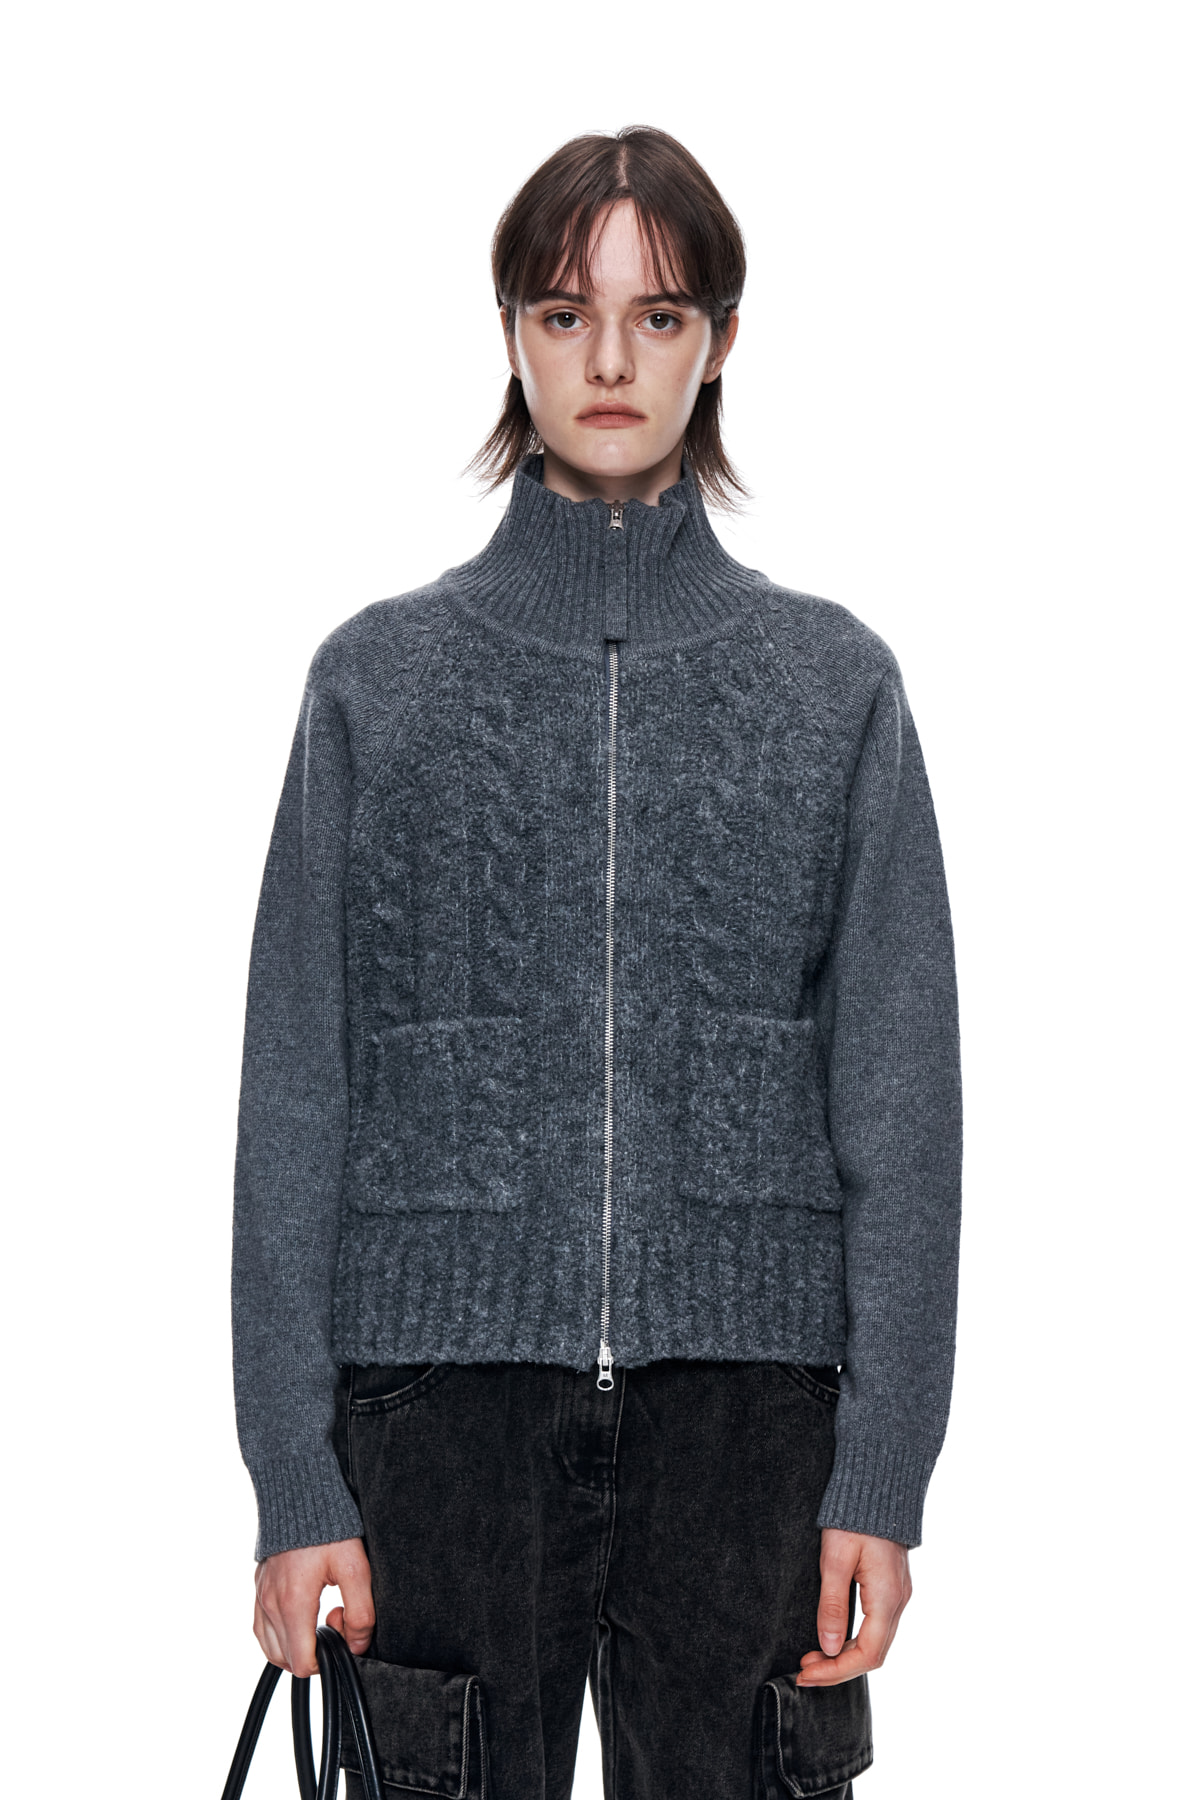 [EXCLUSIVE] SPELL POINT CABLE KNIT ZIP UP IN CHARCOAL